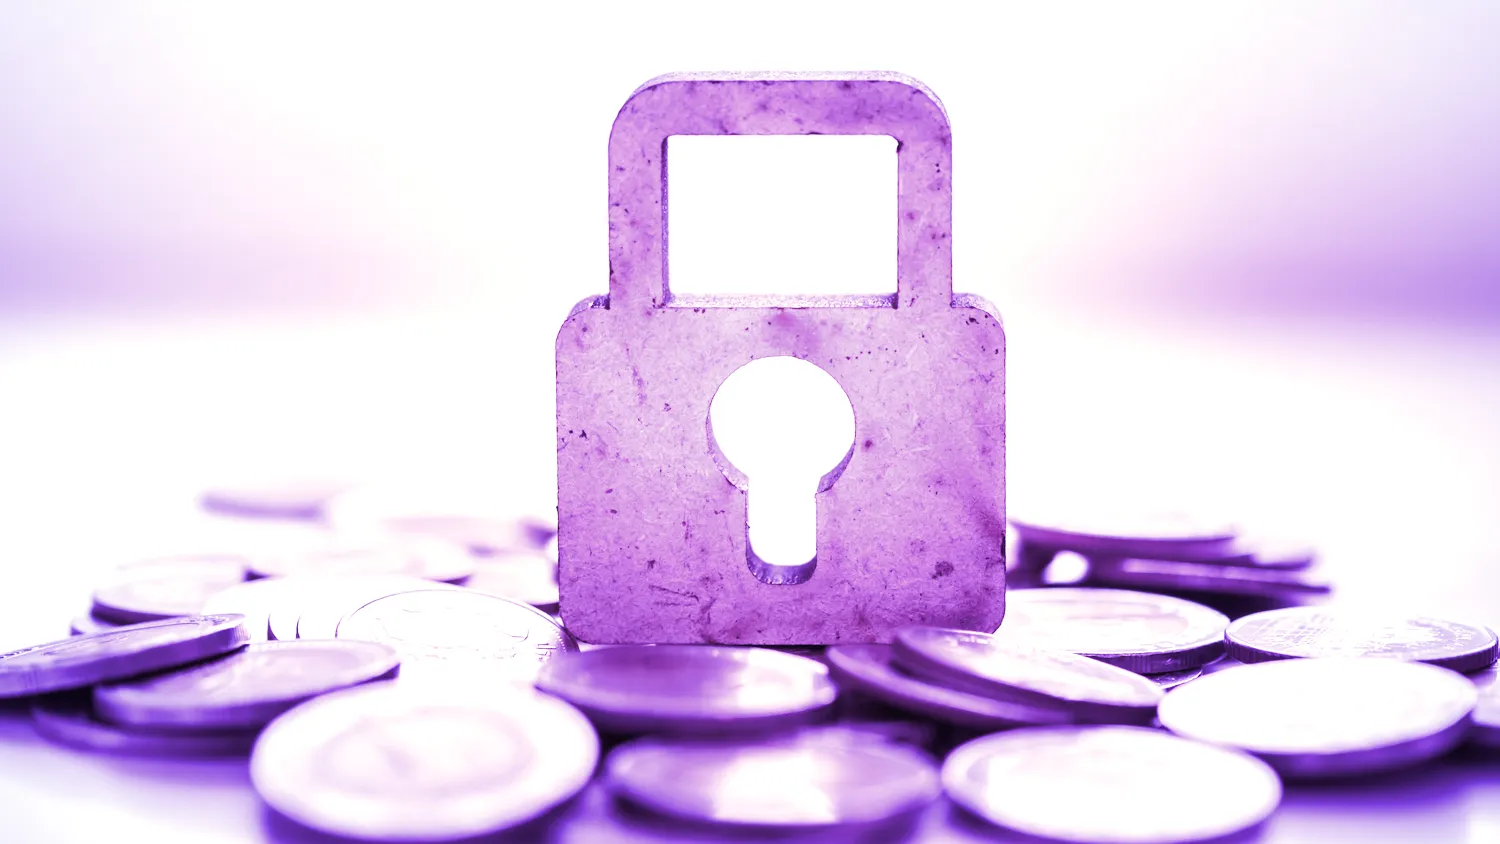 Funds are locked up. Image: Shutterstock